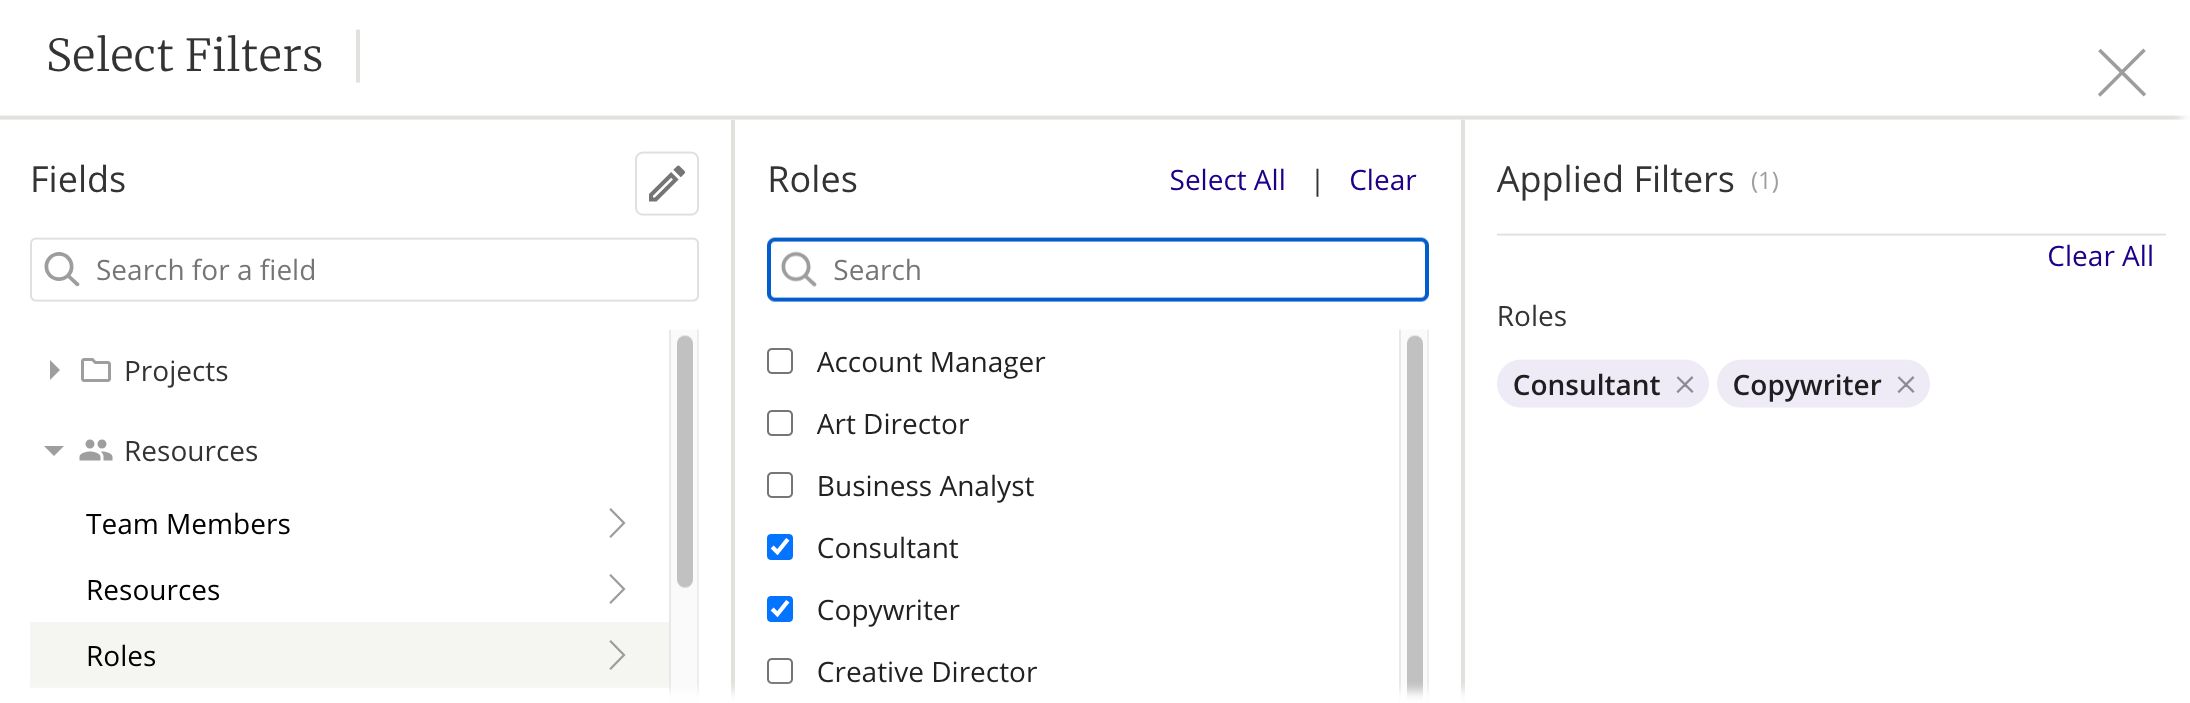 Select Roles in Filters Modal.png